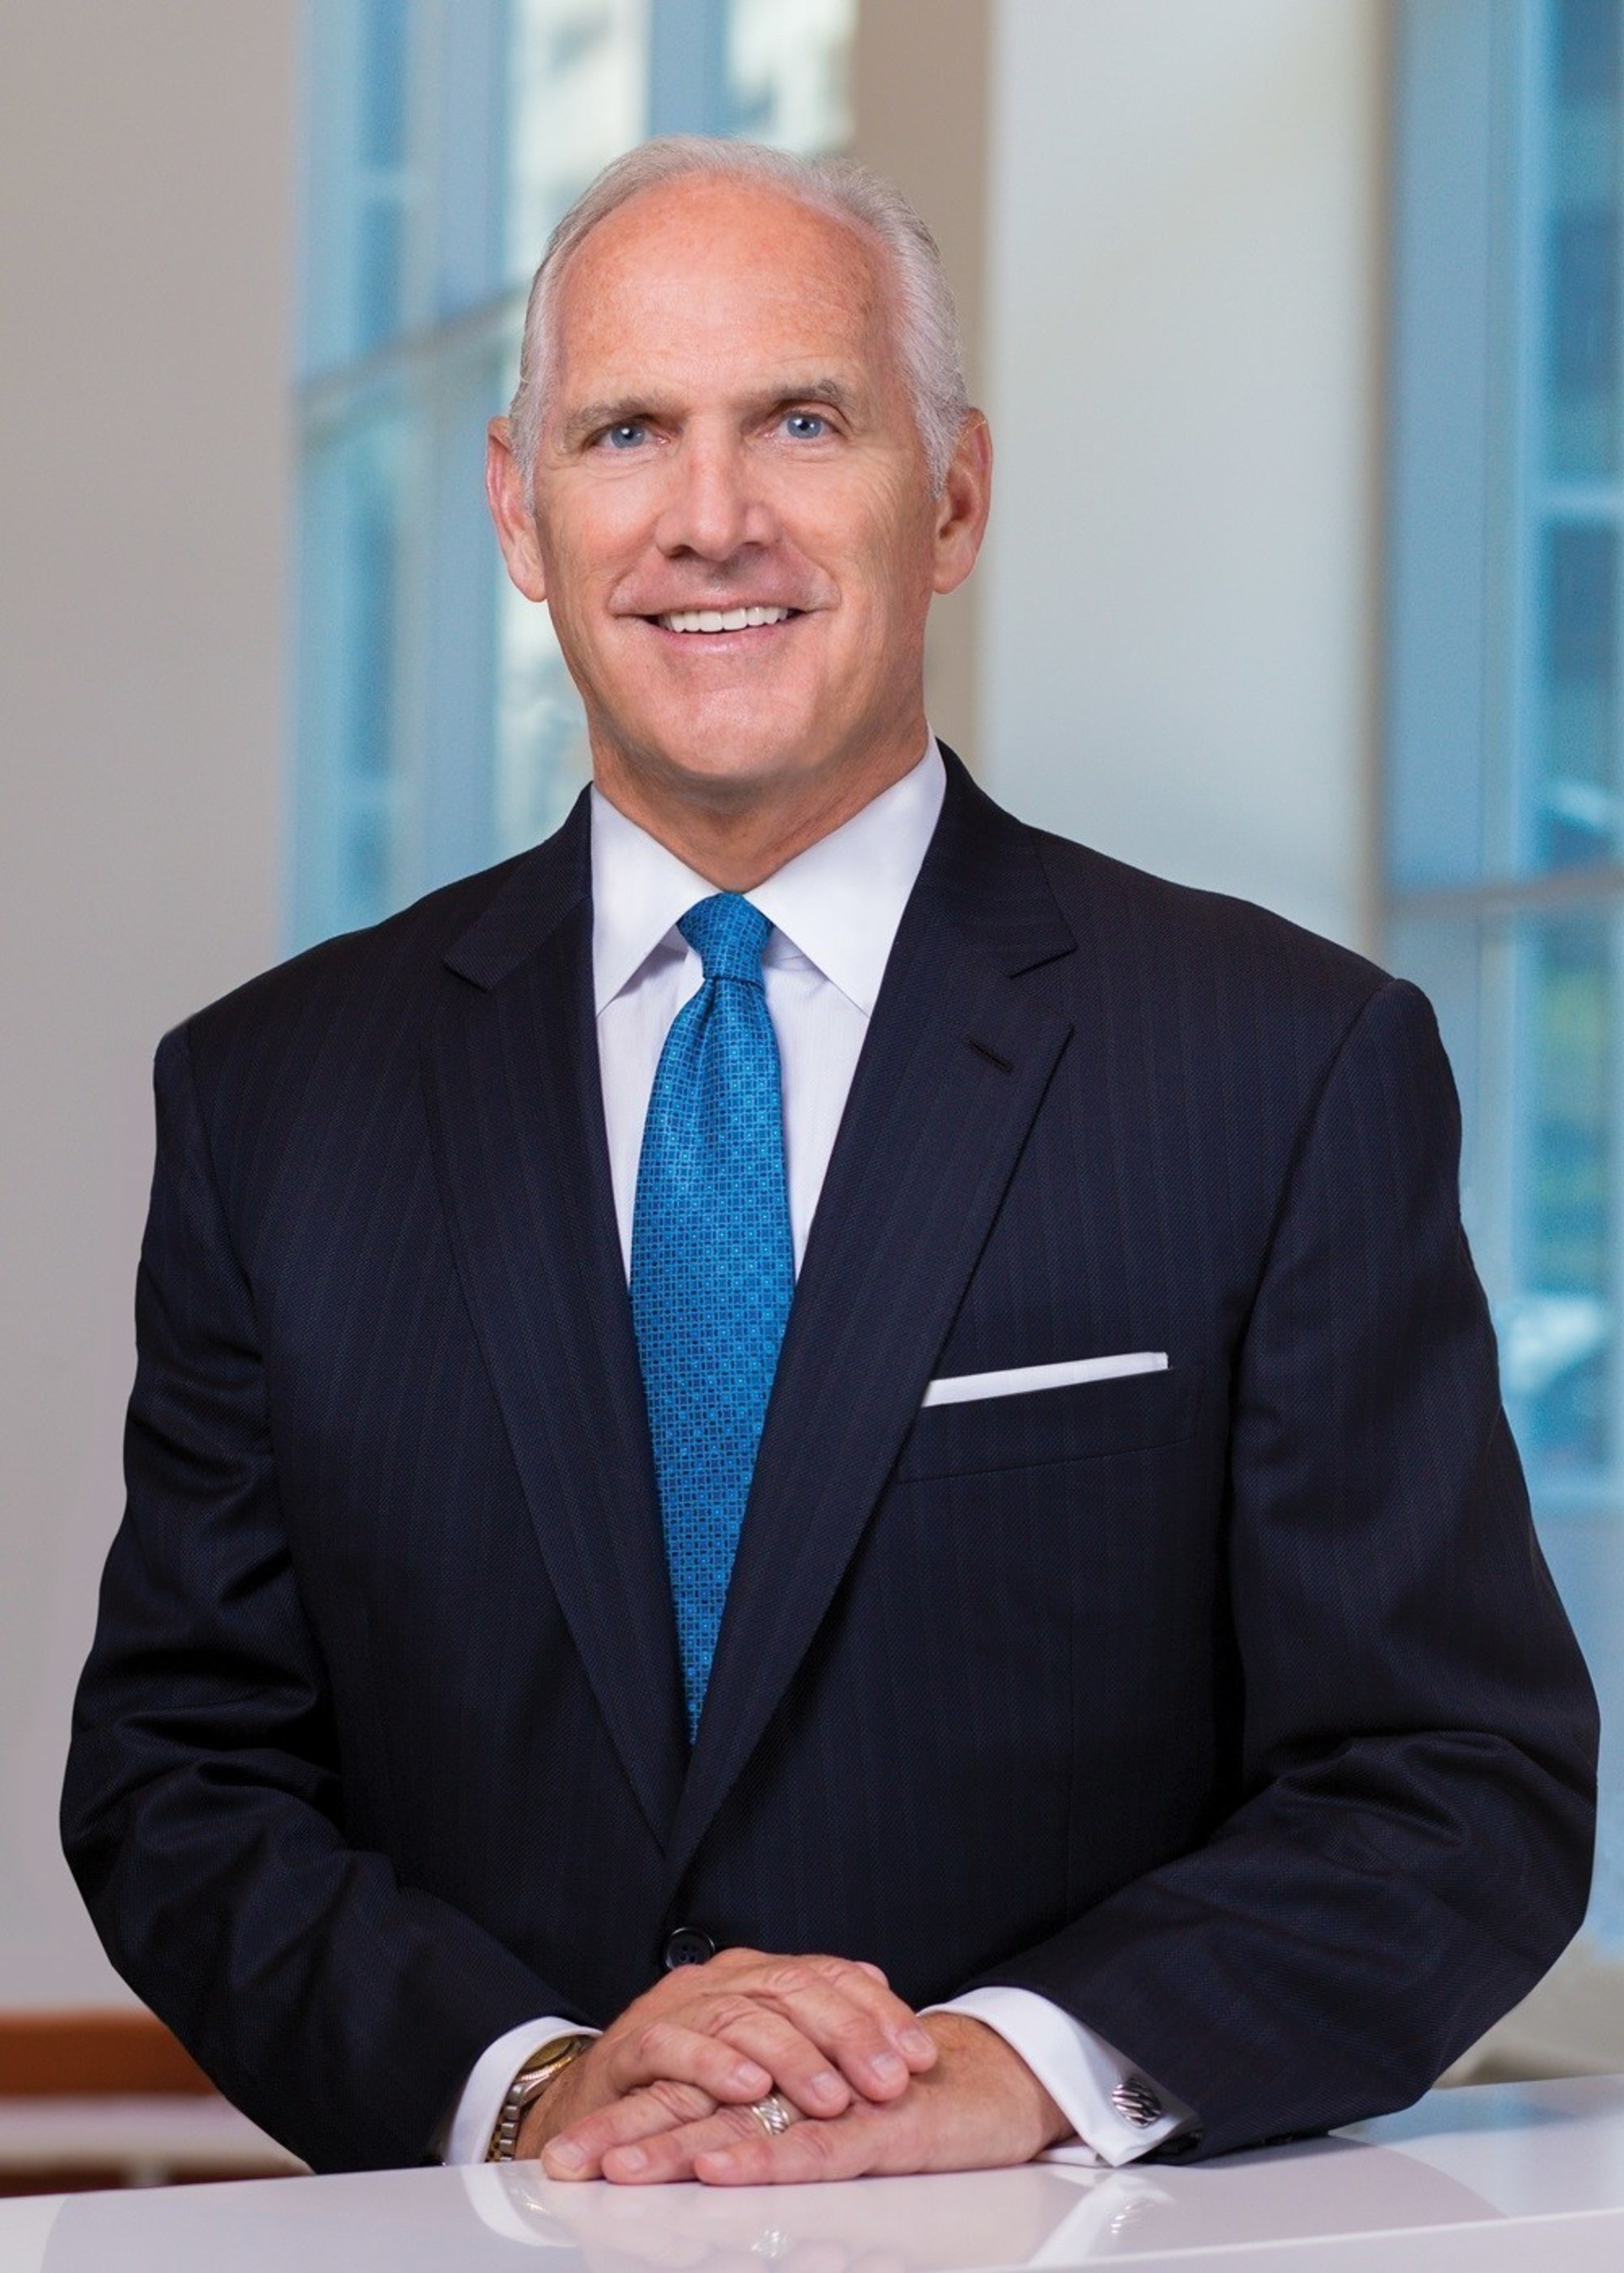 Daniel J. Hilferty, president and chief executive officer, Independence Blue Cross, will serve as chair of United Way of Greater Philadelphia and Southern New Jersey's 2016-17 annual fundraising campaign.